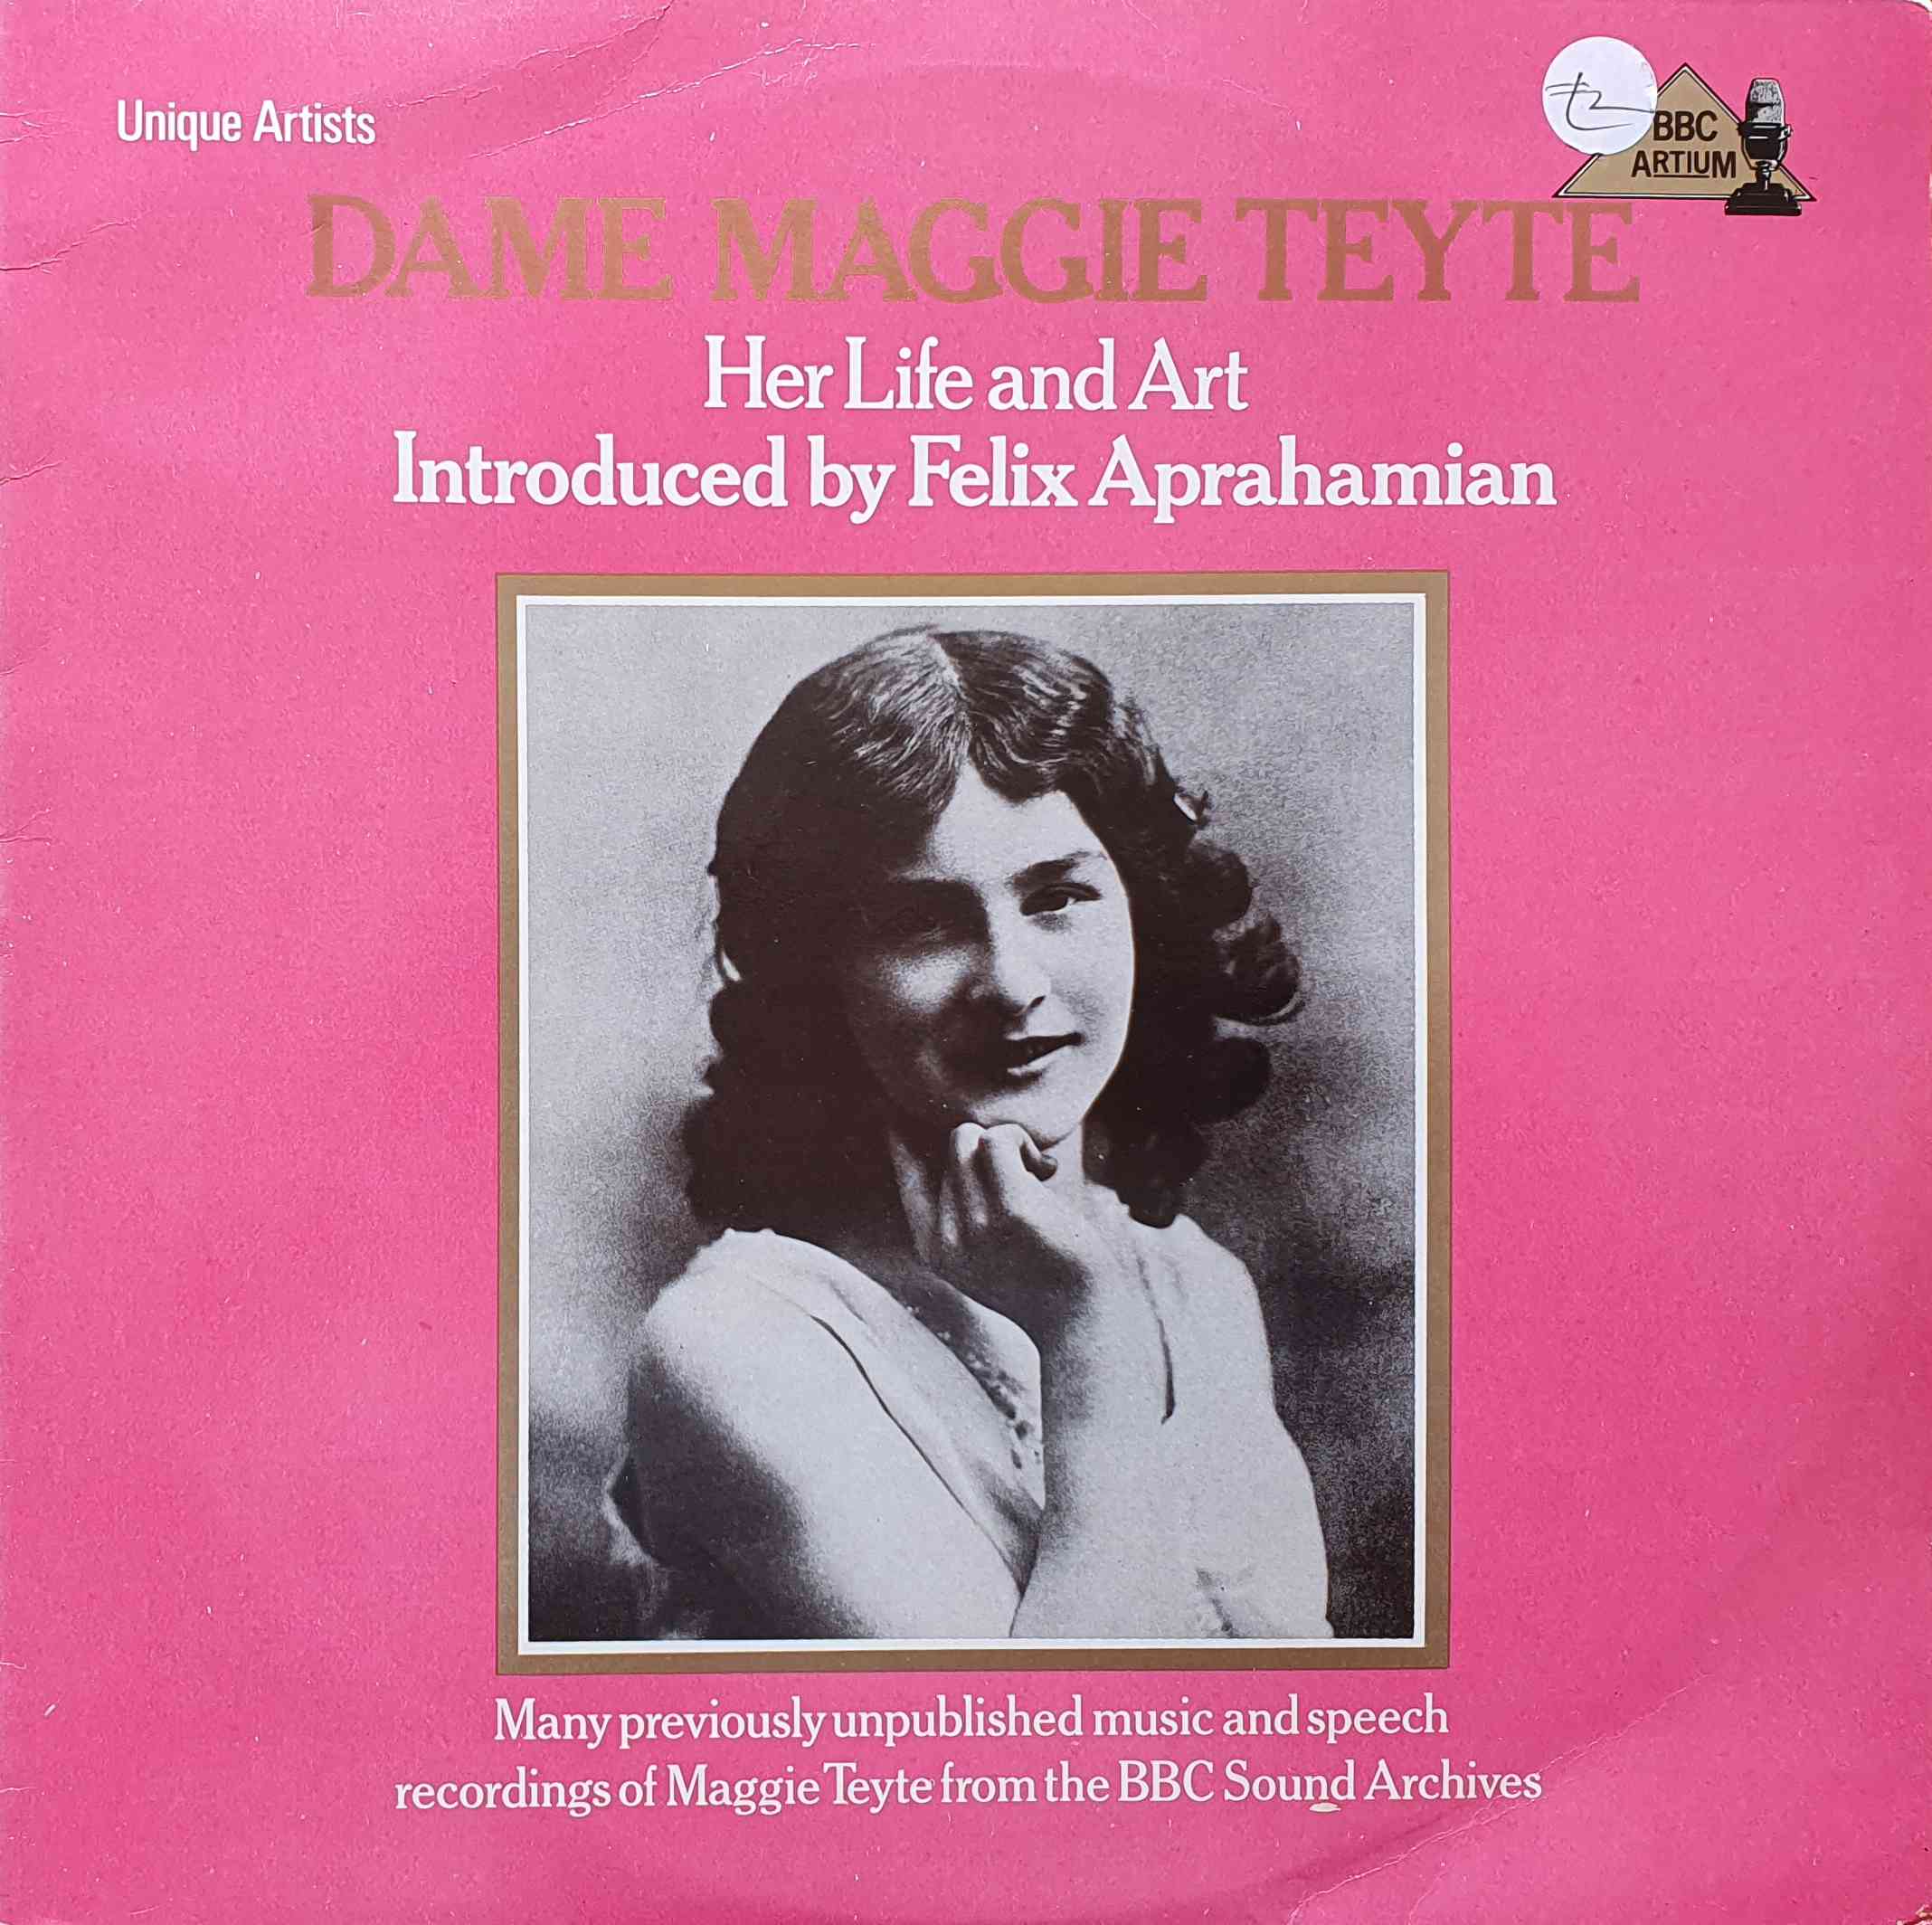 Picture of REGL 369 Dame Maggie Teyte by artist Dame Maggie Teyte